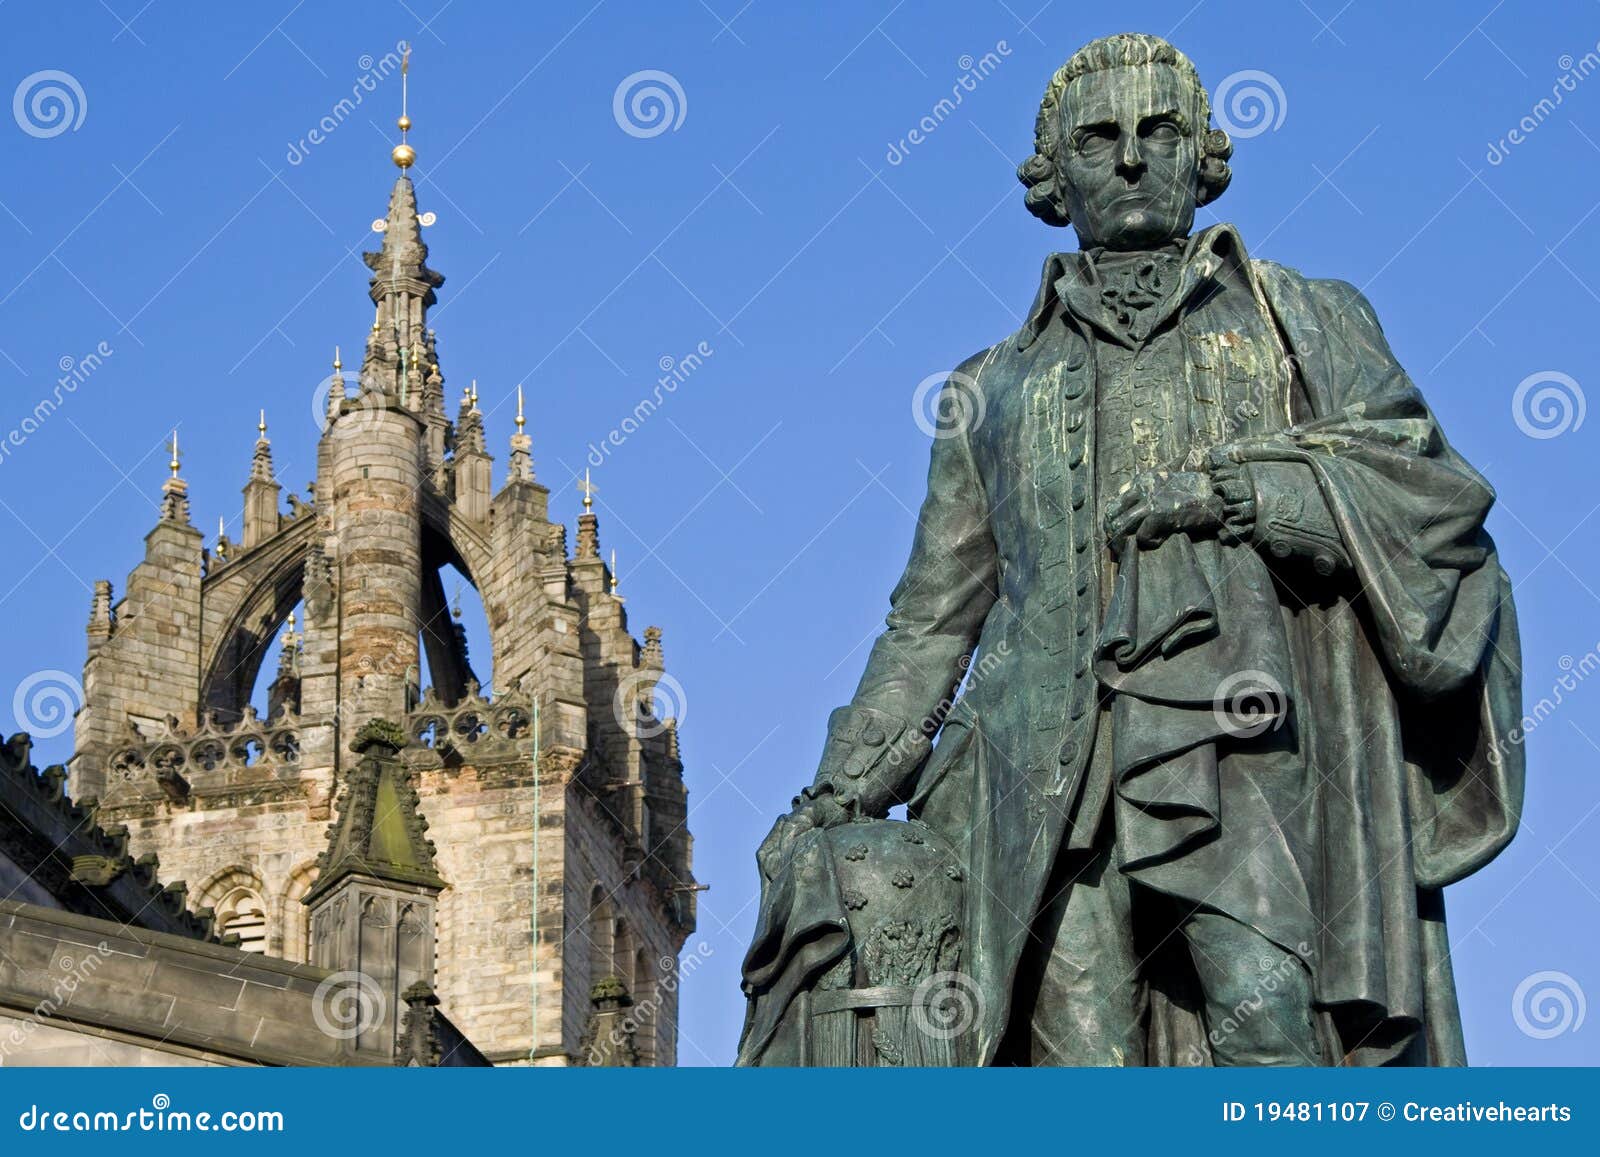 adam smith, monument and st giles cathedral